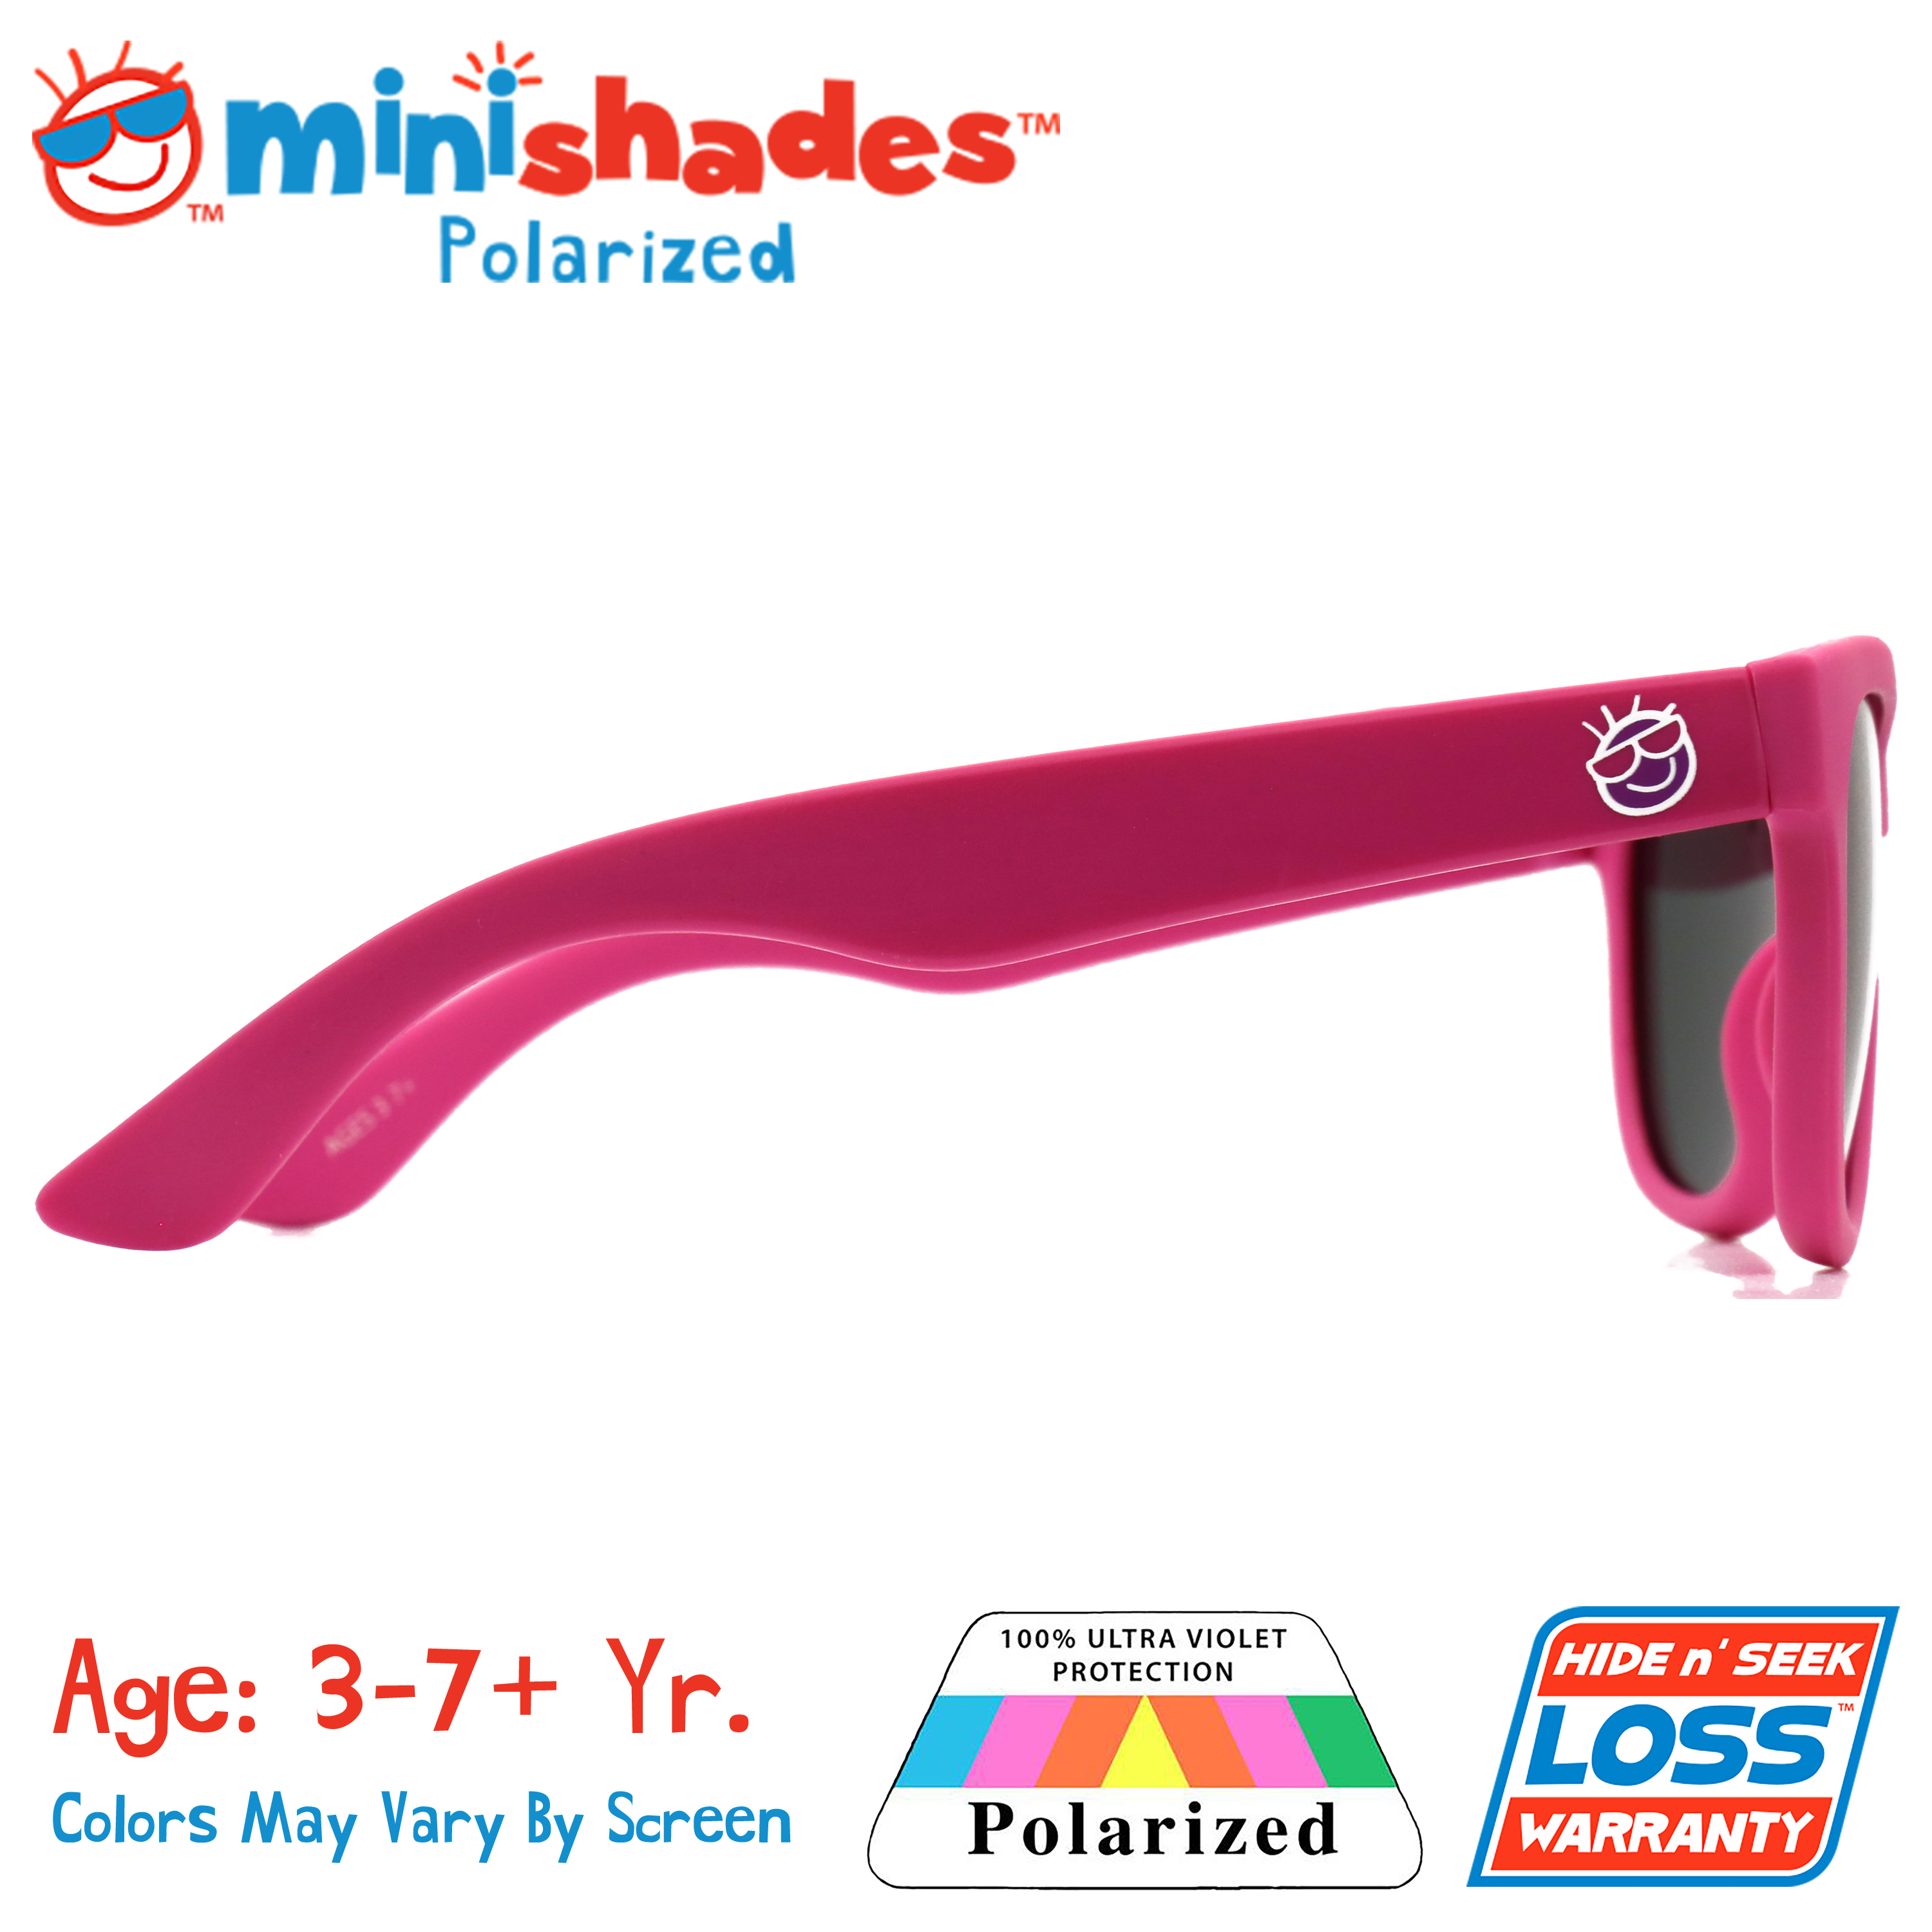 Minishades Polarized: Flexible Kids Sunglasses - Hot Pink |UVA/UVB| Hide n' Seek Replacement | Age: 3-7+Yr. - image 4 of 4